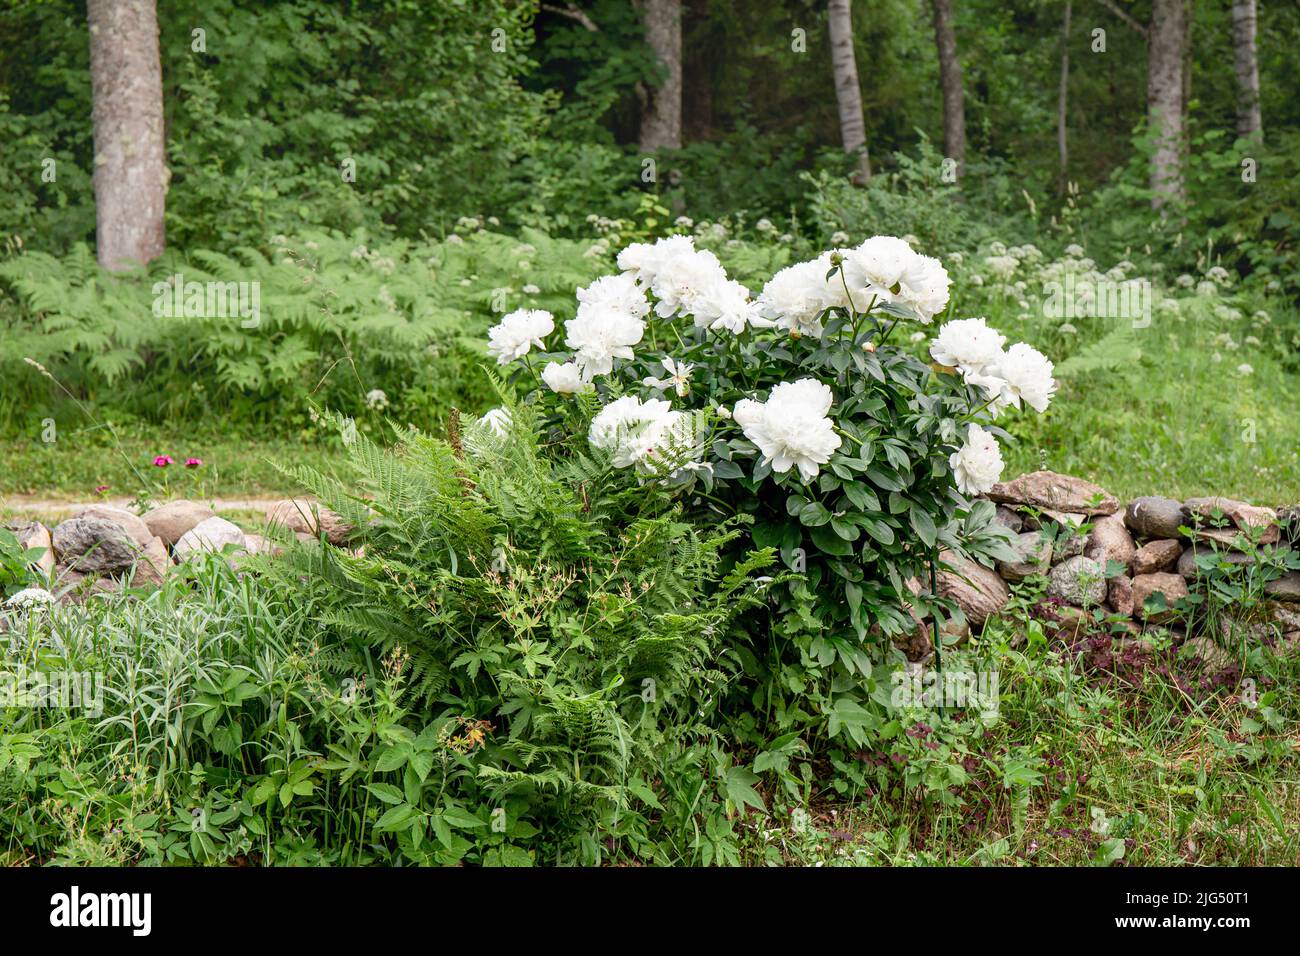 White peony or paeony flower bush growing in home garden. Big white blossoms in summer outdoors. Stock Photo